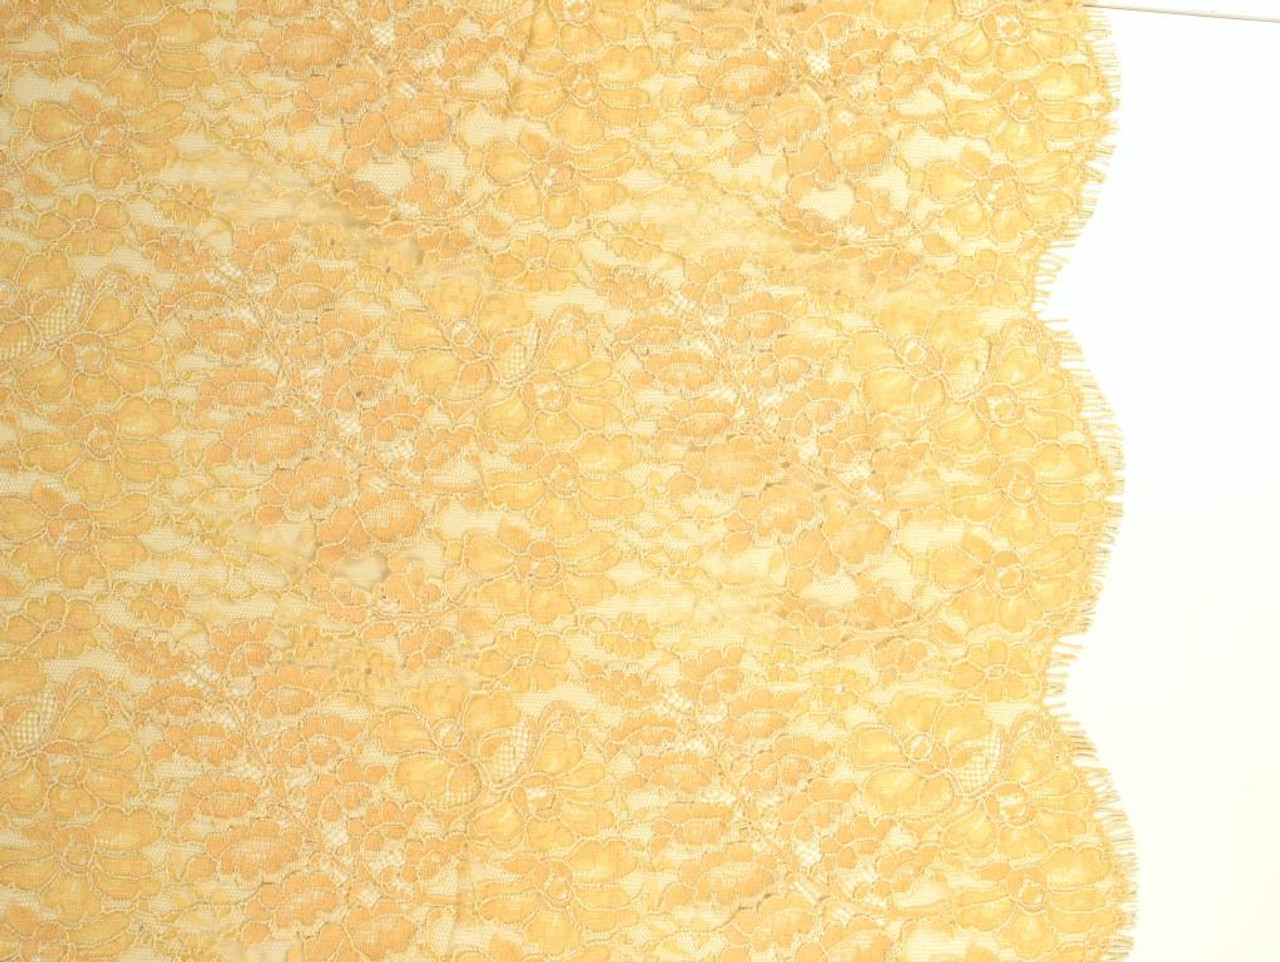 Dressmaking Fabric, Catherine Narrow Corded Lace - Soft Yellow